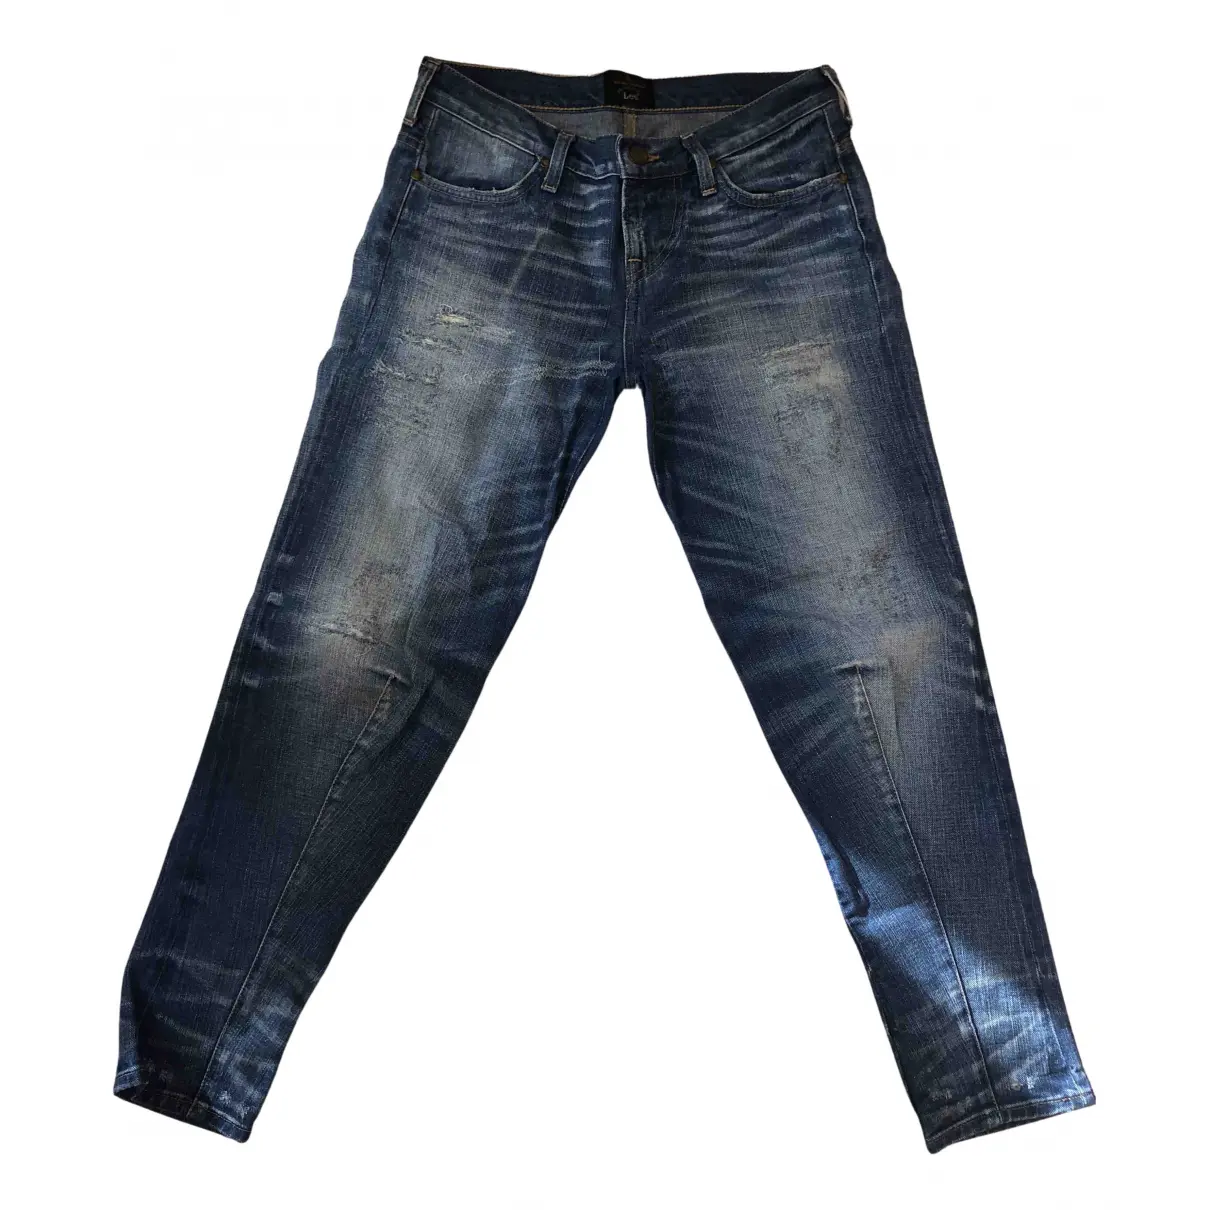 Straight jeans Vivienne Westwood Anglomania